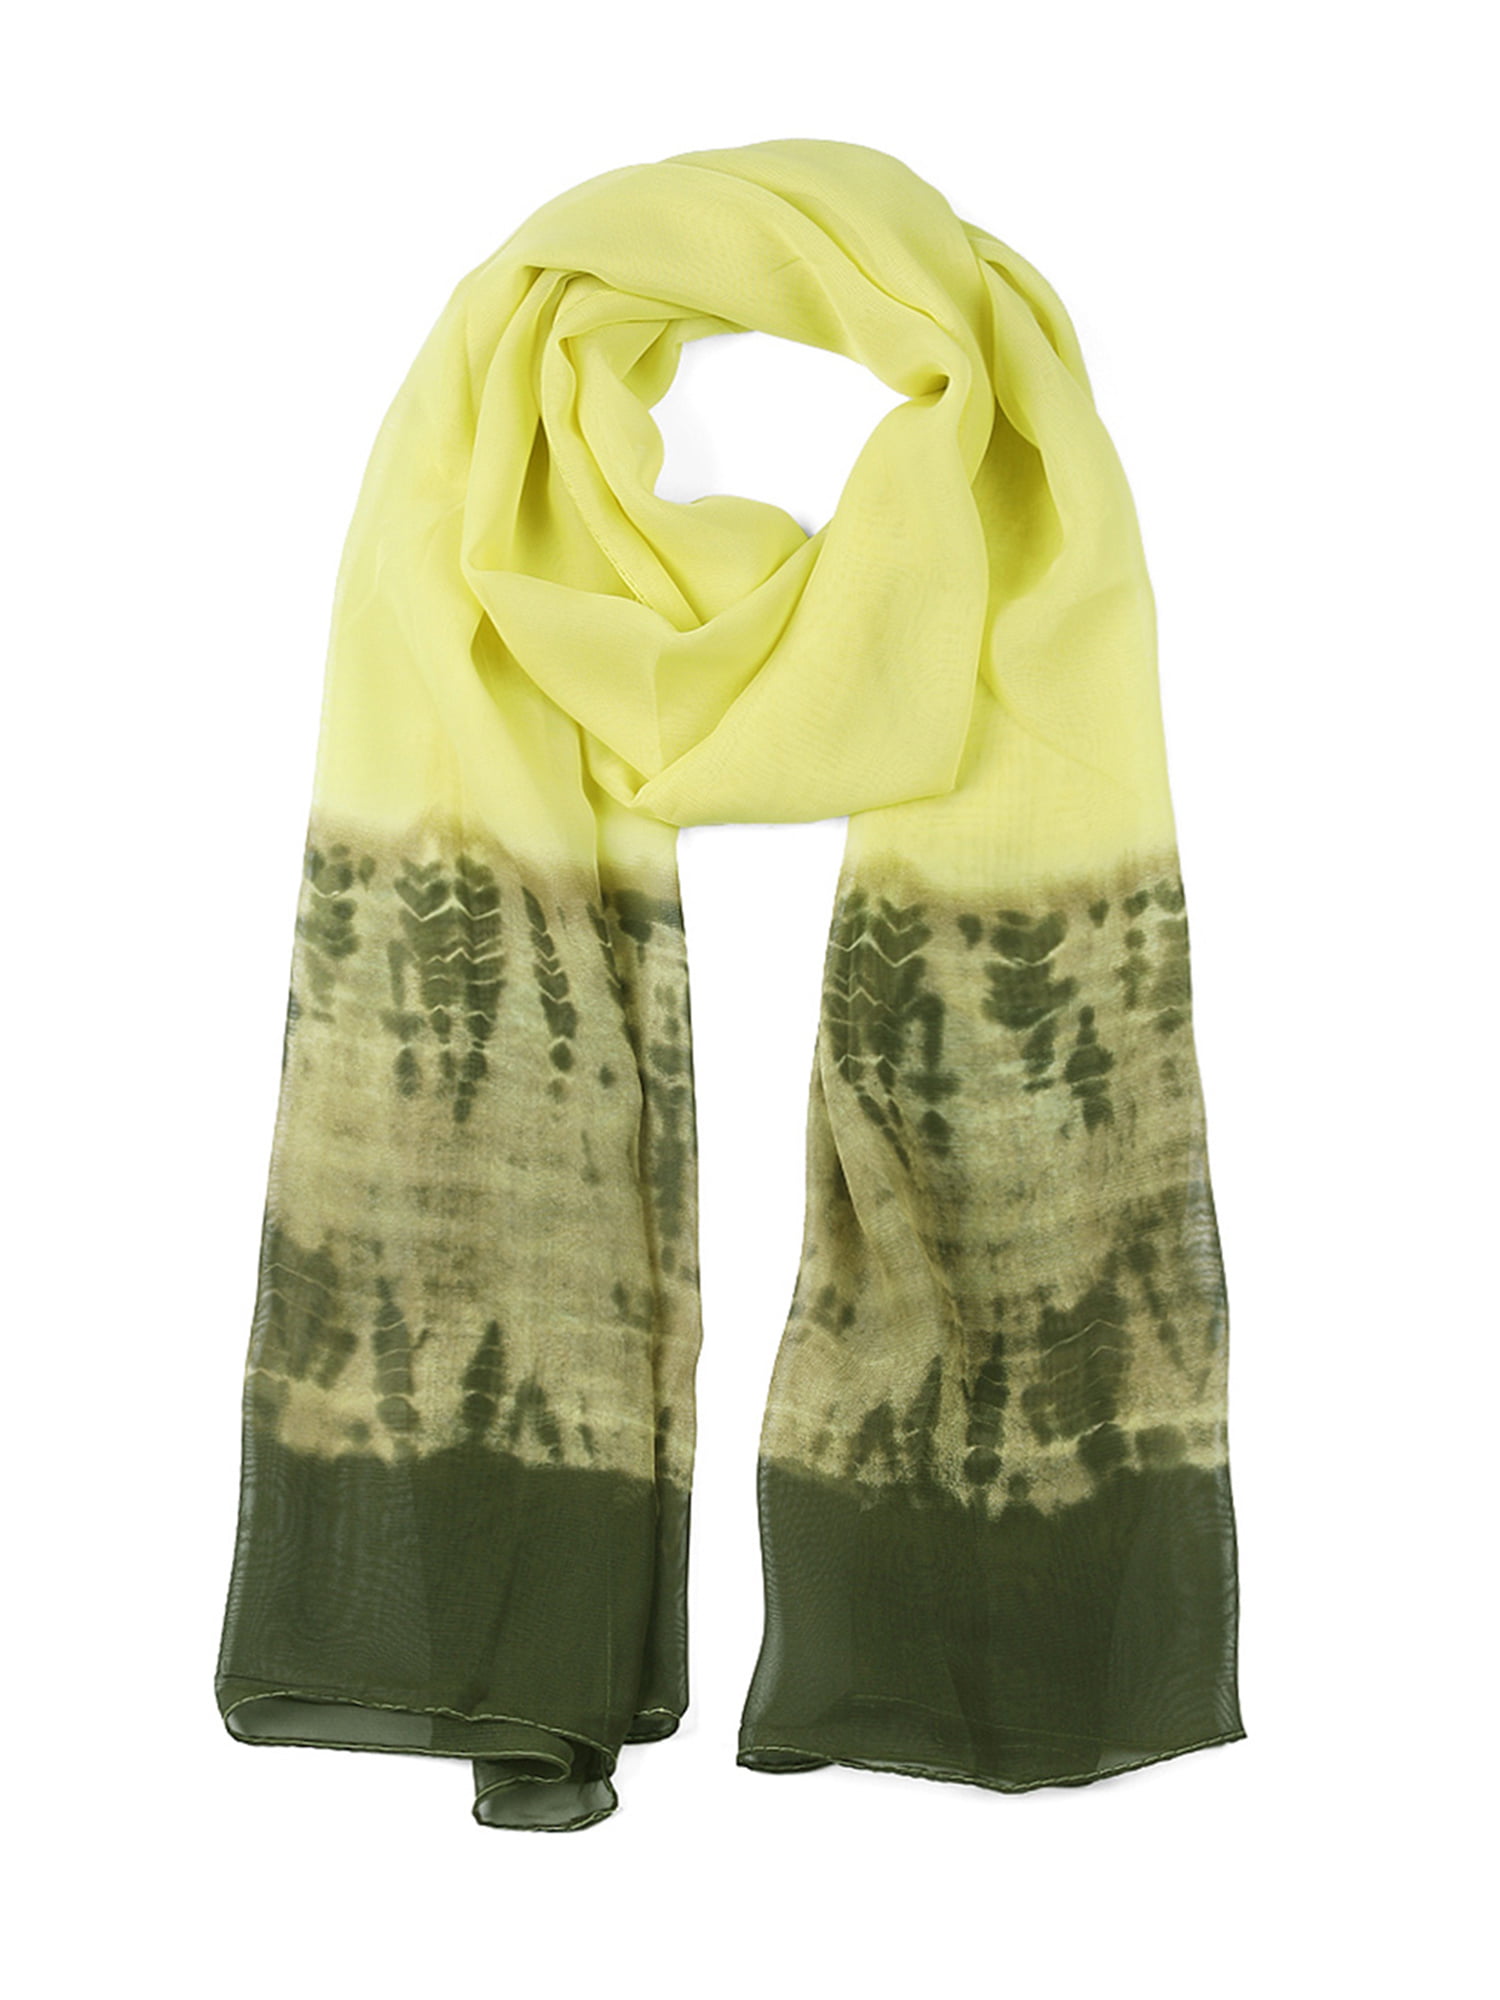 Green Solid and Patterned Flutter Scarf Lightweight Women Accessory